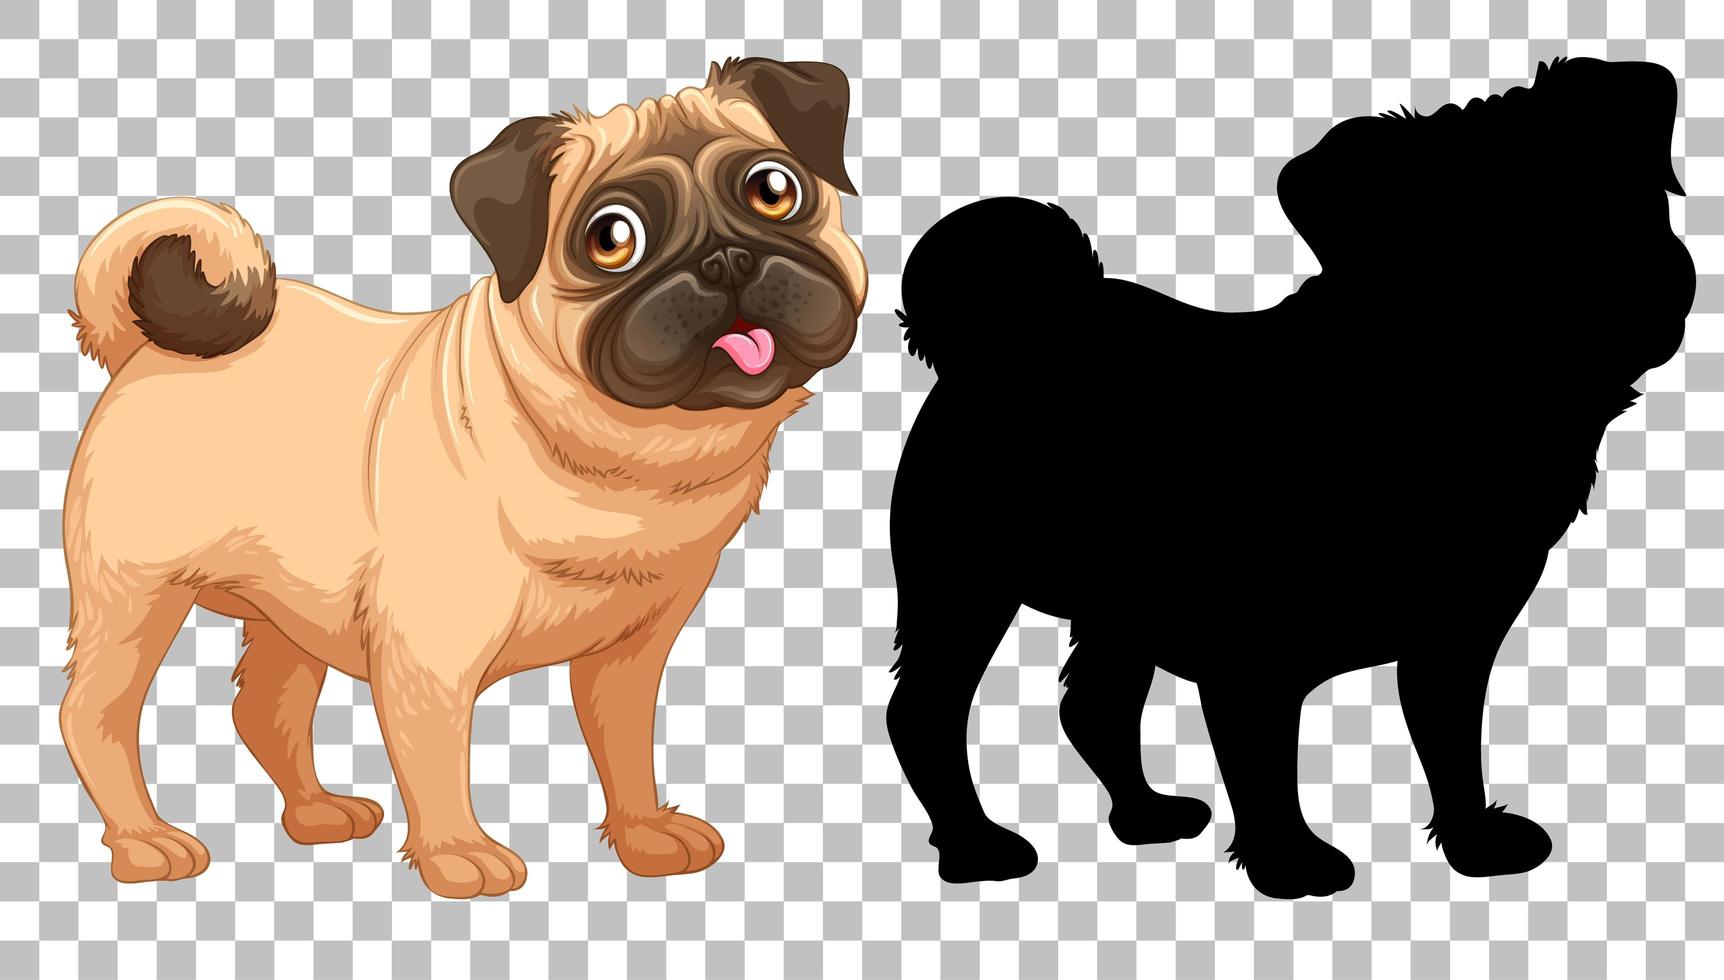 Cute pug dog and its silhouette on transparent background vector